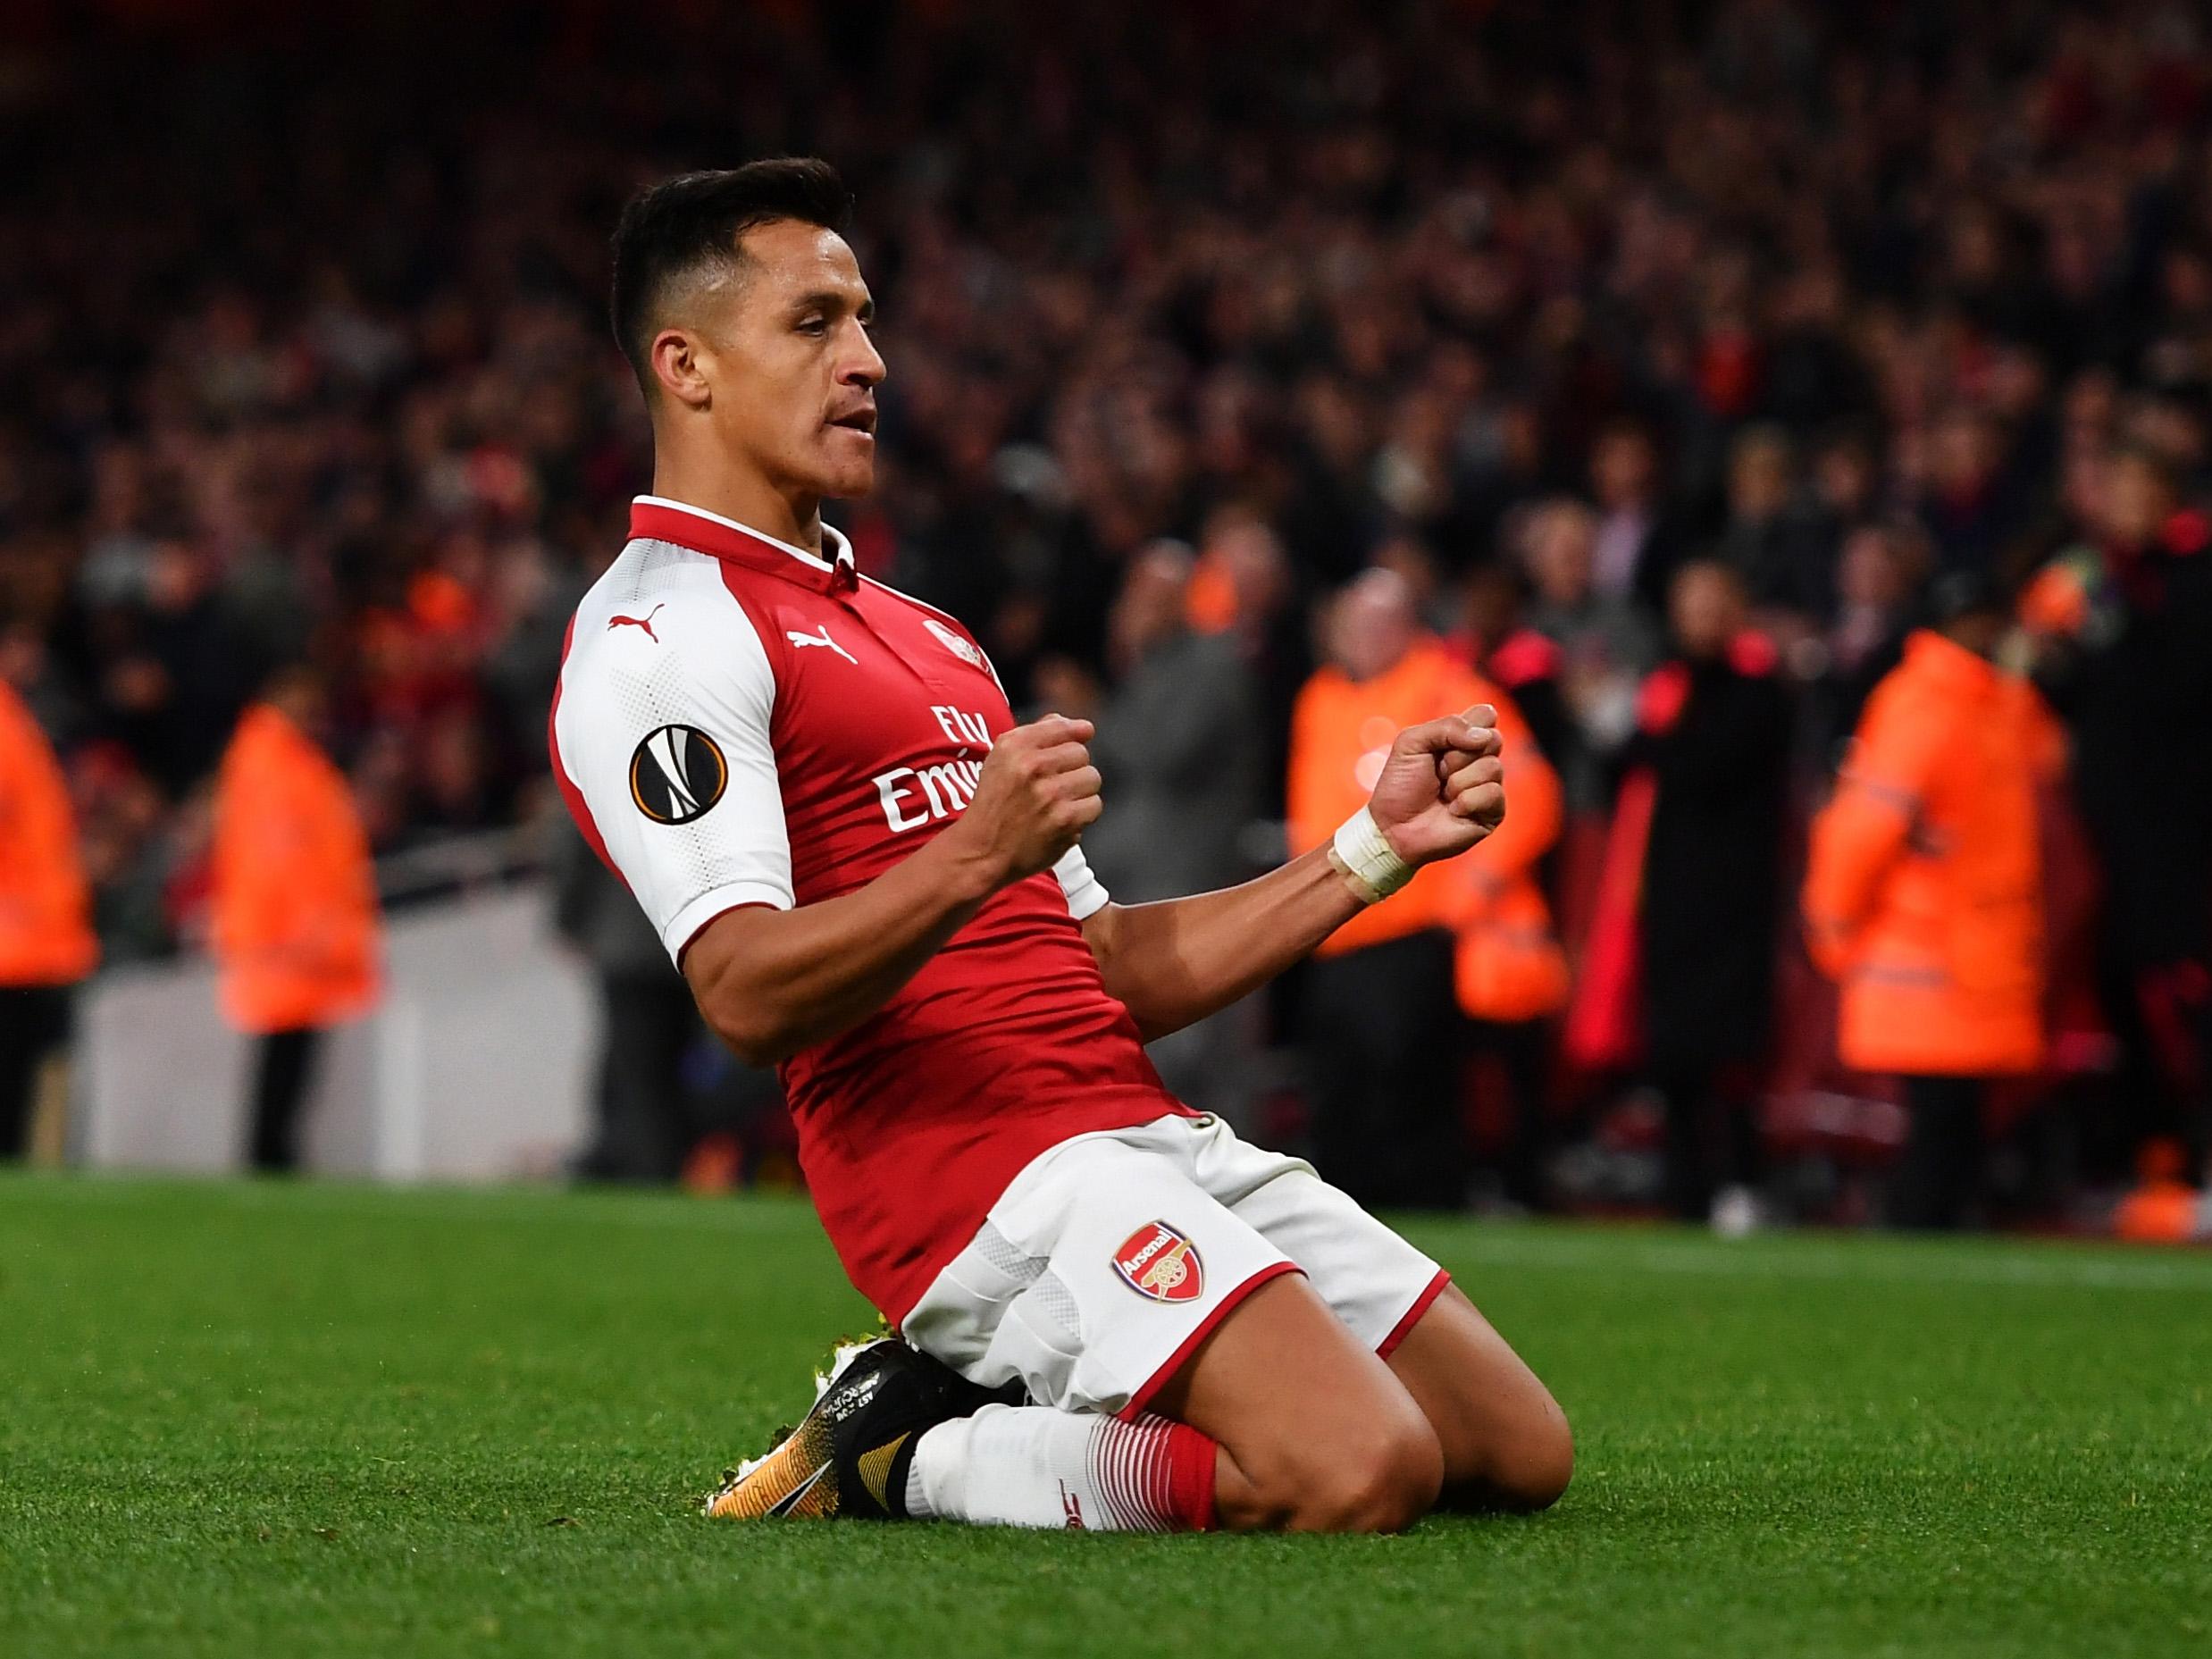 Alexis Sanchez won the game himself with a brilliant goal that only he could have scored